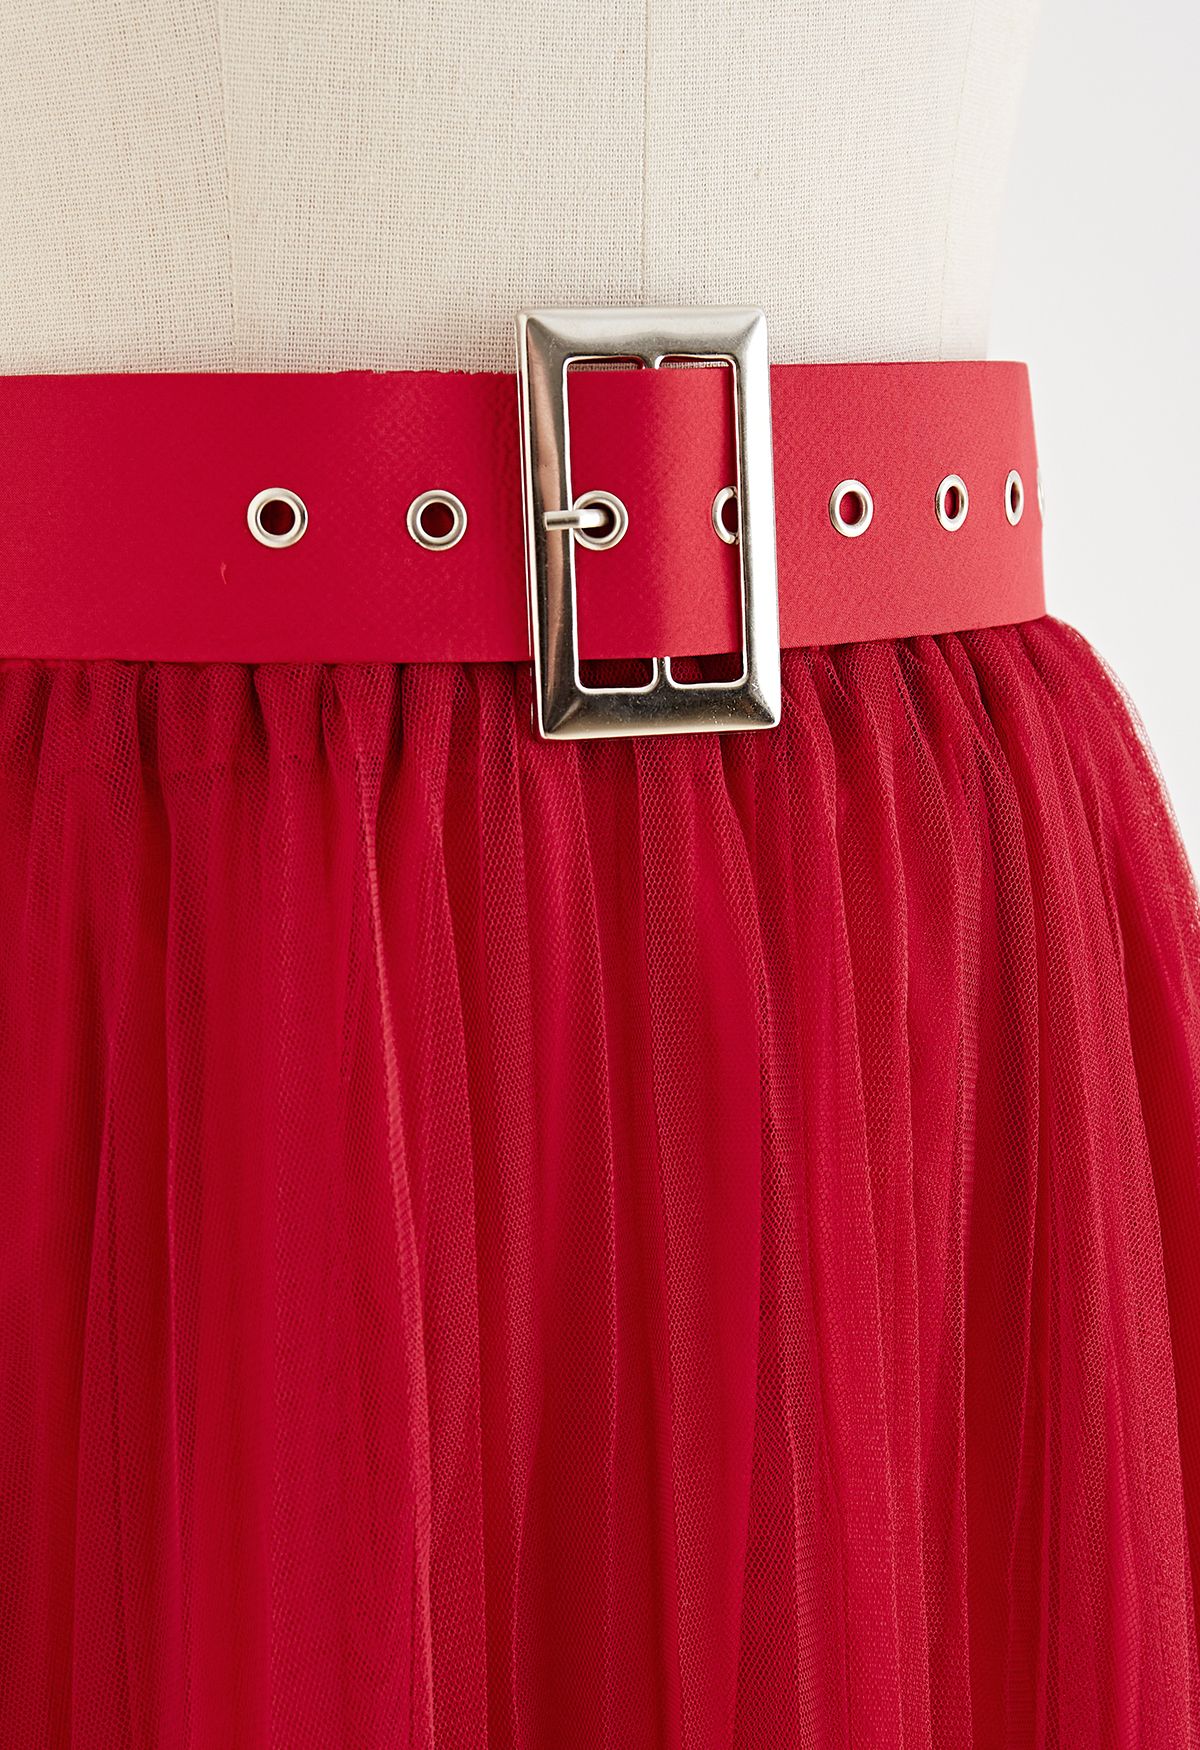 Full Pleated Double-Layered Mesh Midi Skirt in Red